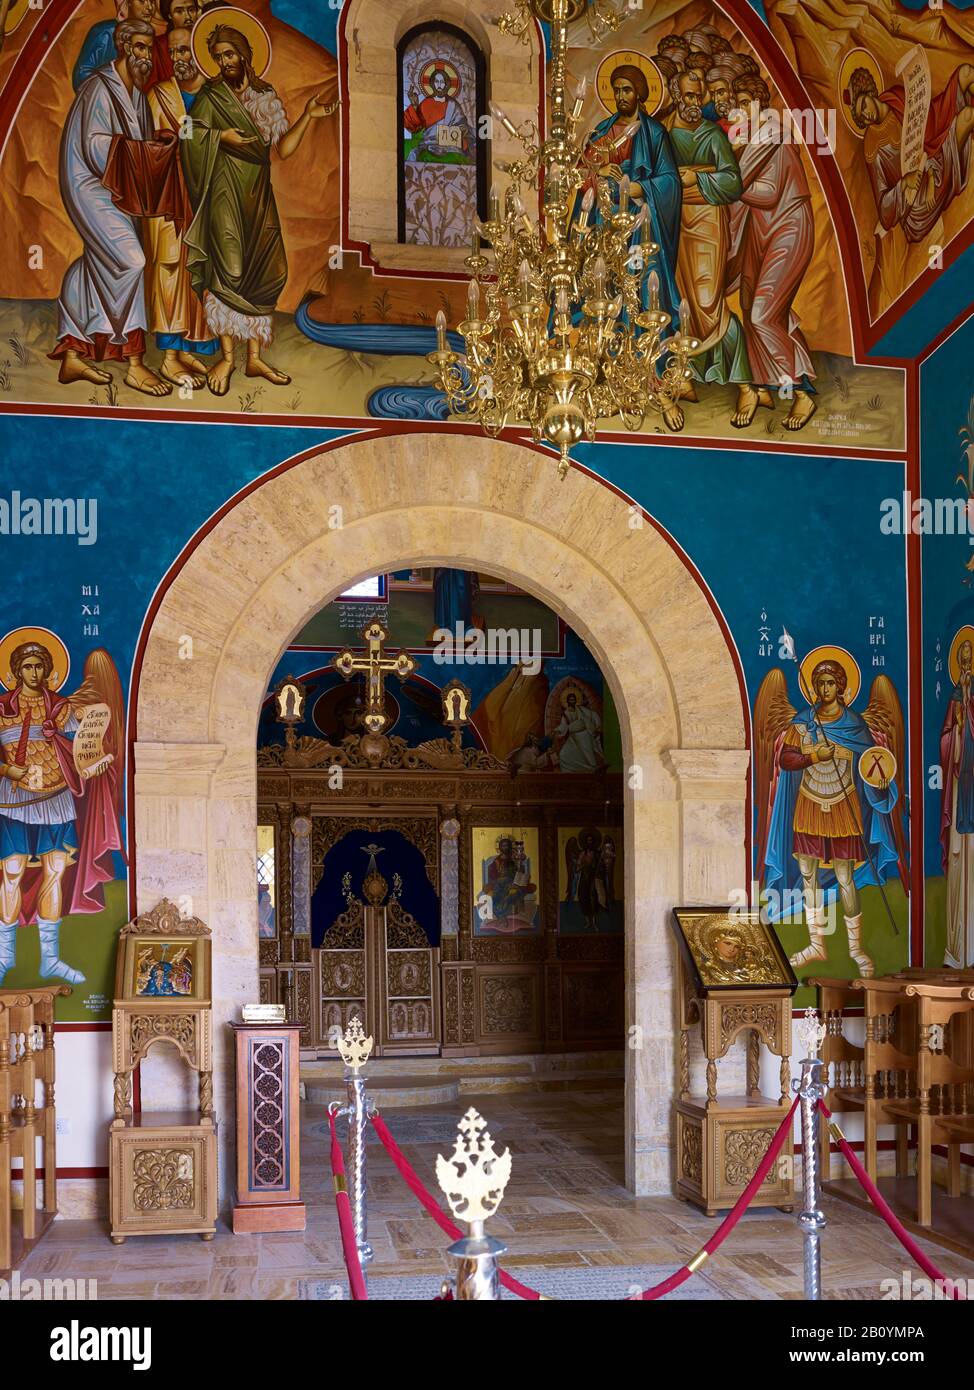 New Orthodox Church at the Baptism Site of Jesus, Balqa Province, Jordan, Middle East, Stock Photo